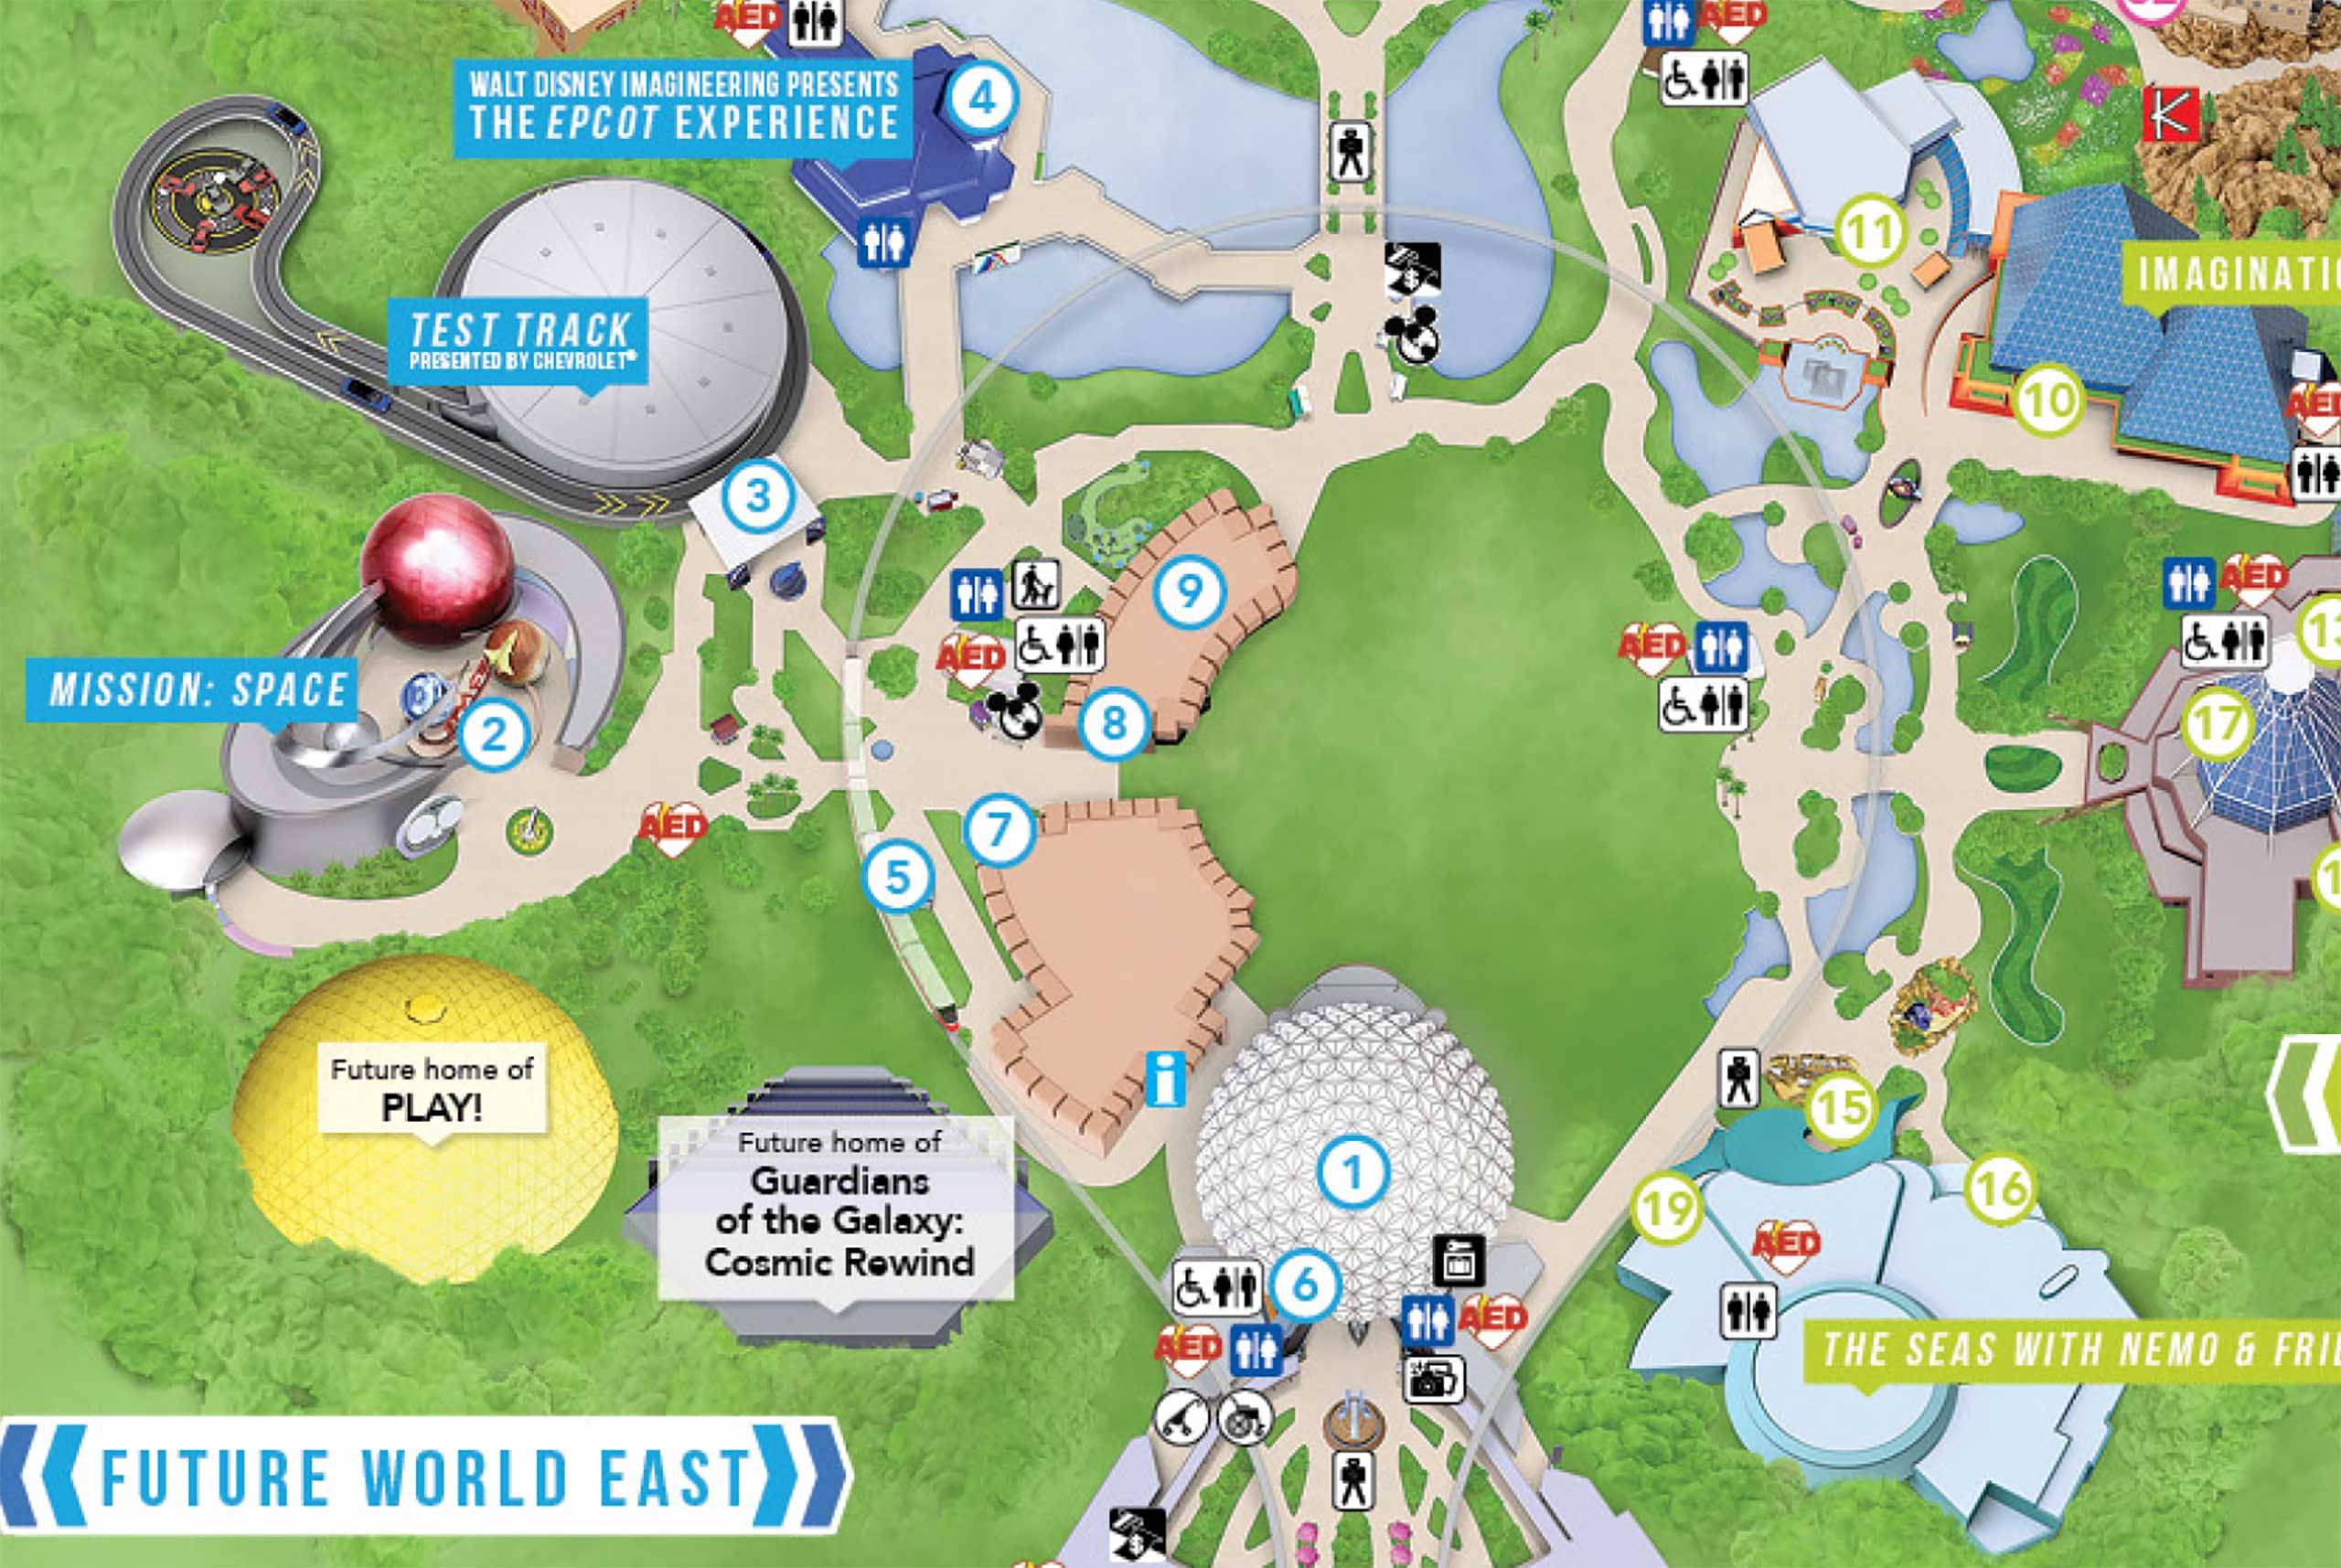 Creations Shop and Club Cool on the new EPCOT guide map